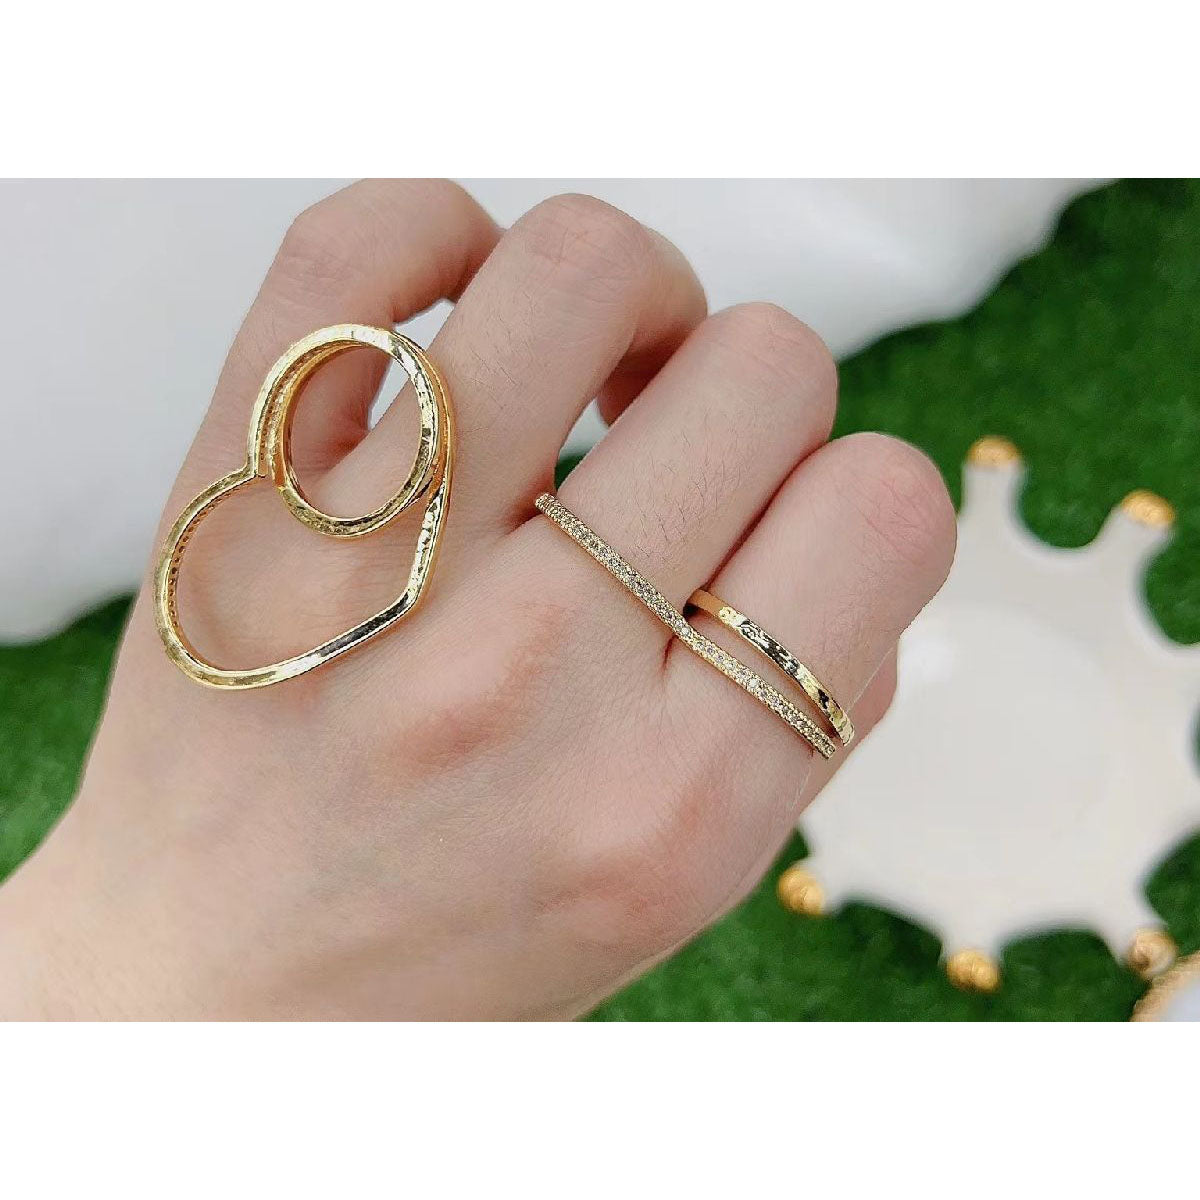 LUOEM Golden Simple Fashion Smooth Single Index Finger Ring for Women Men  with 20 mm Inner Diameter : Amazon.in: Jewellery